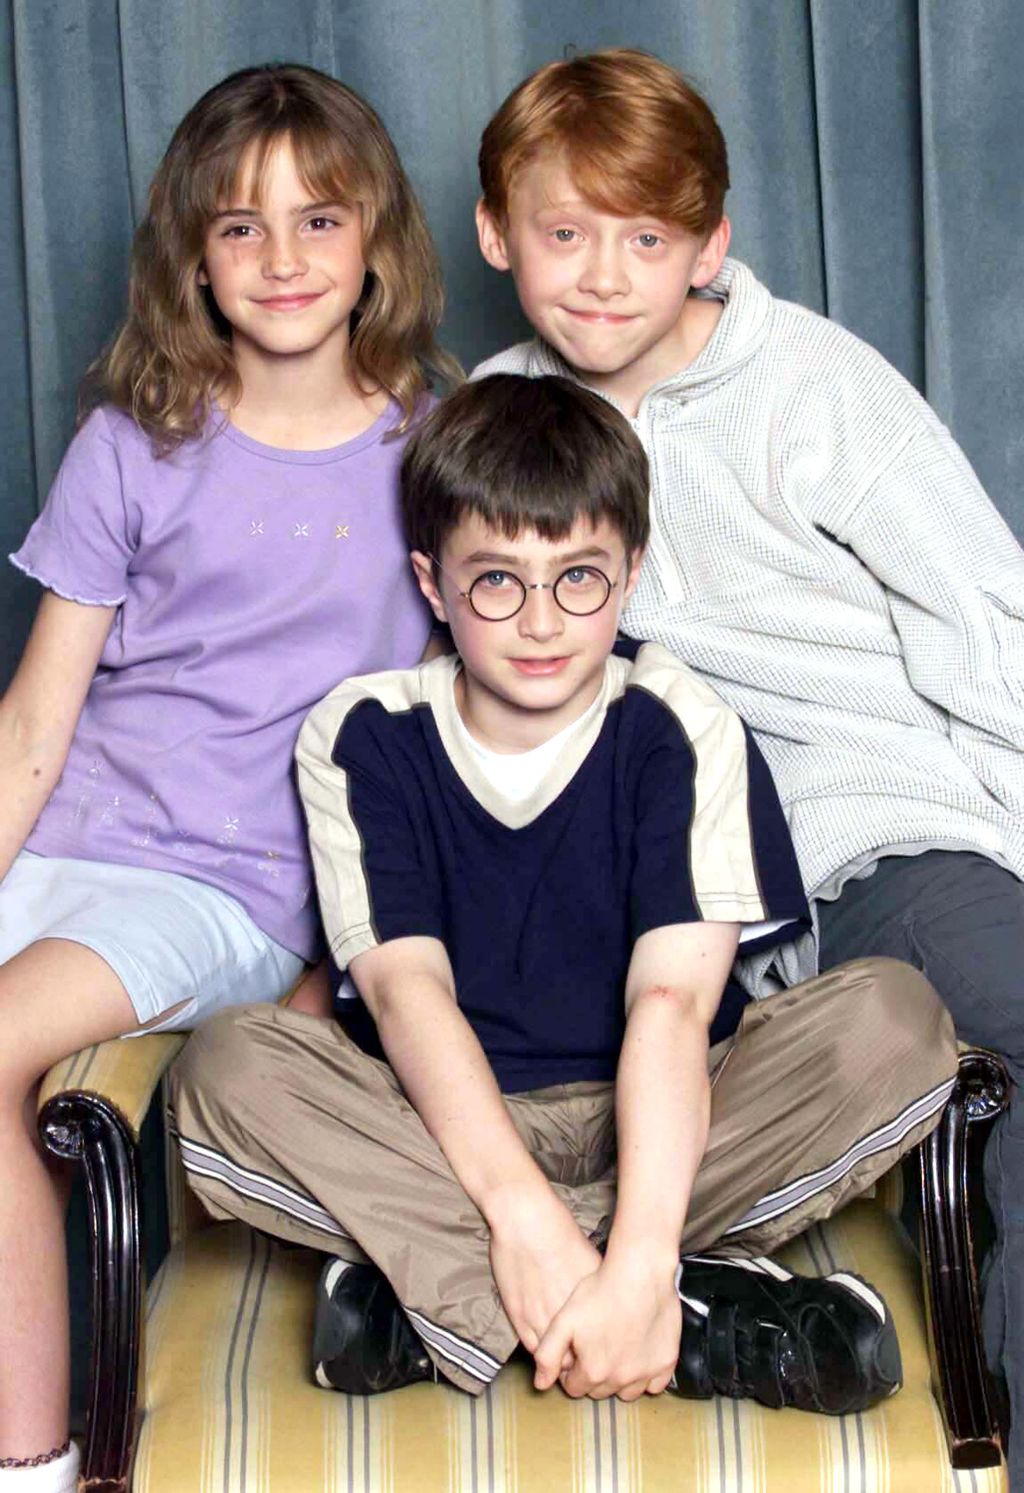 Harry Potter Photocall